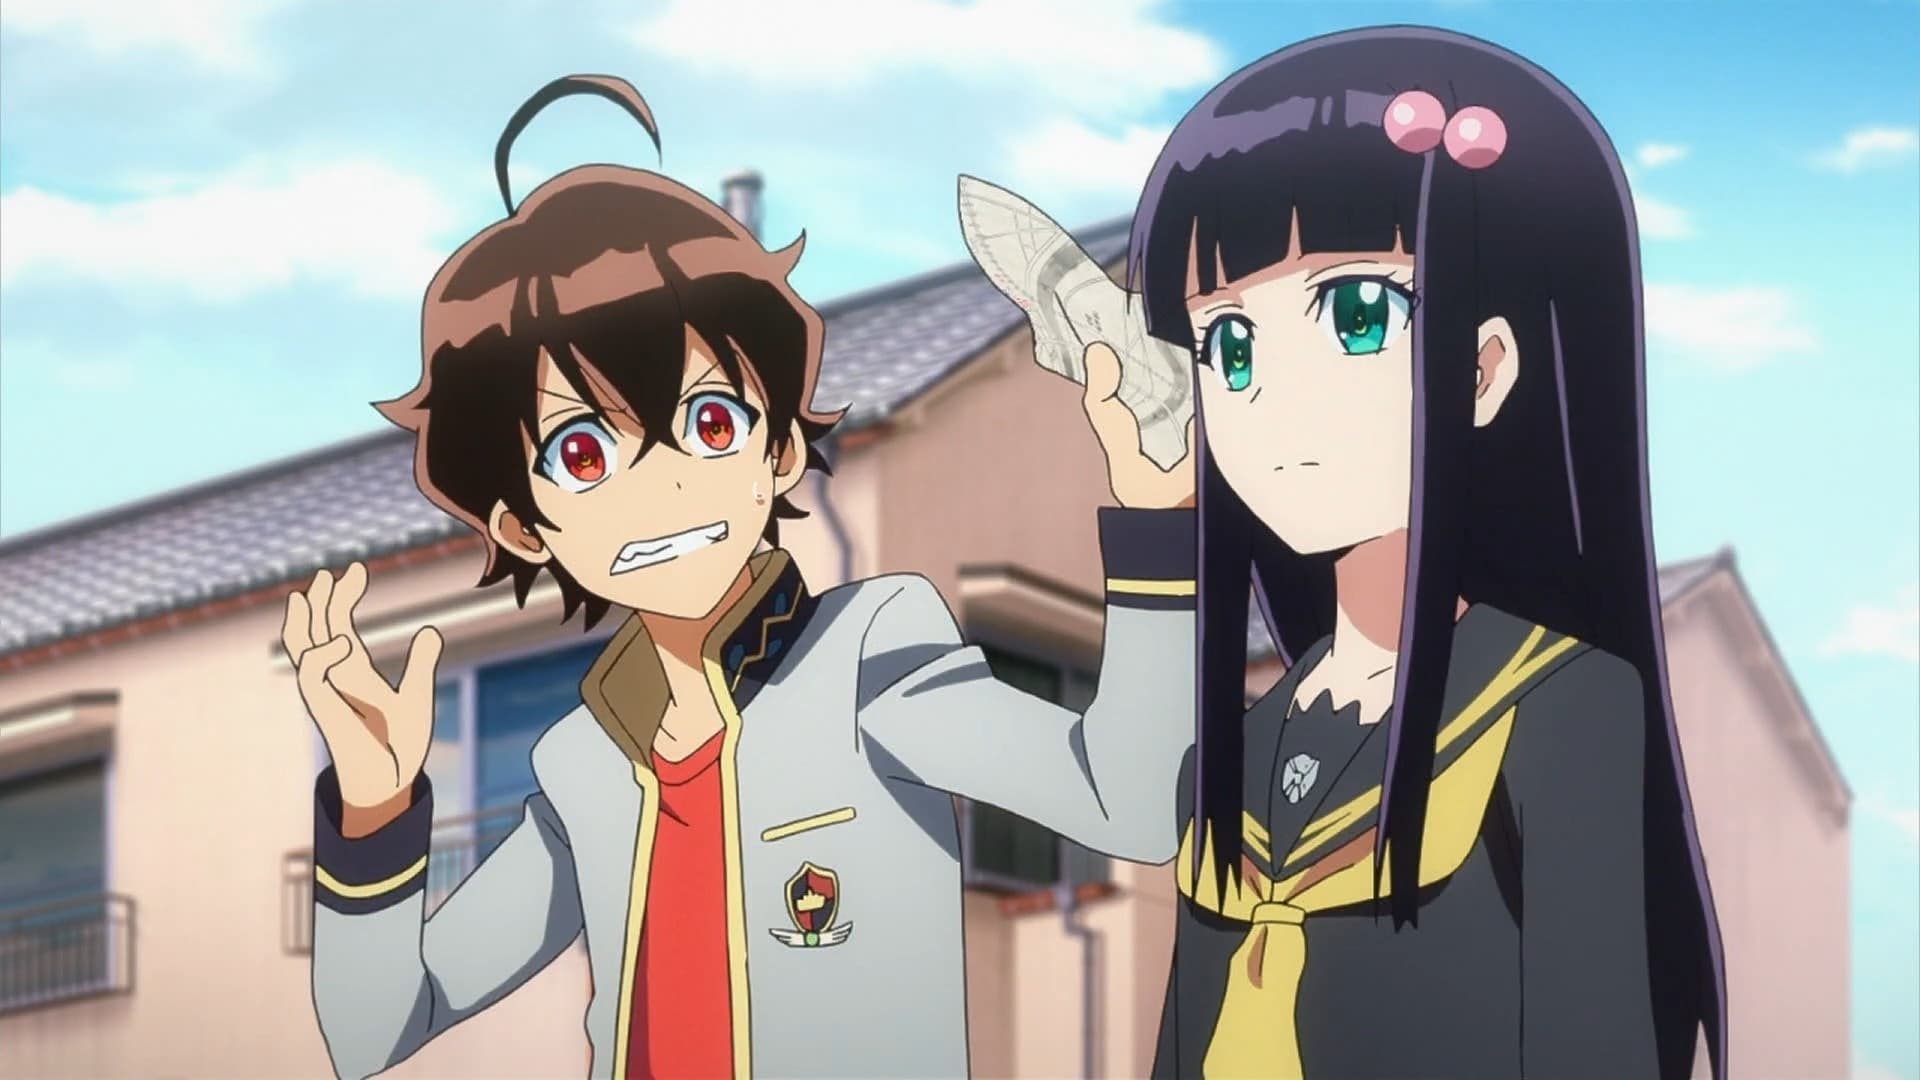 Twin Star Exorcists " The Destined Two - Boy Meets Girl.